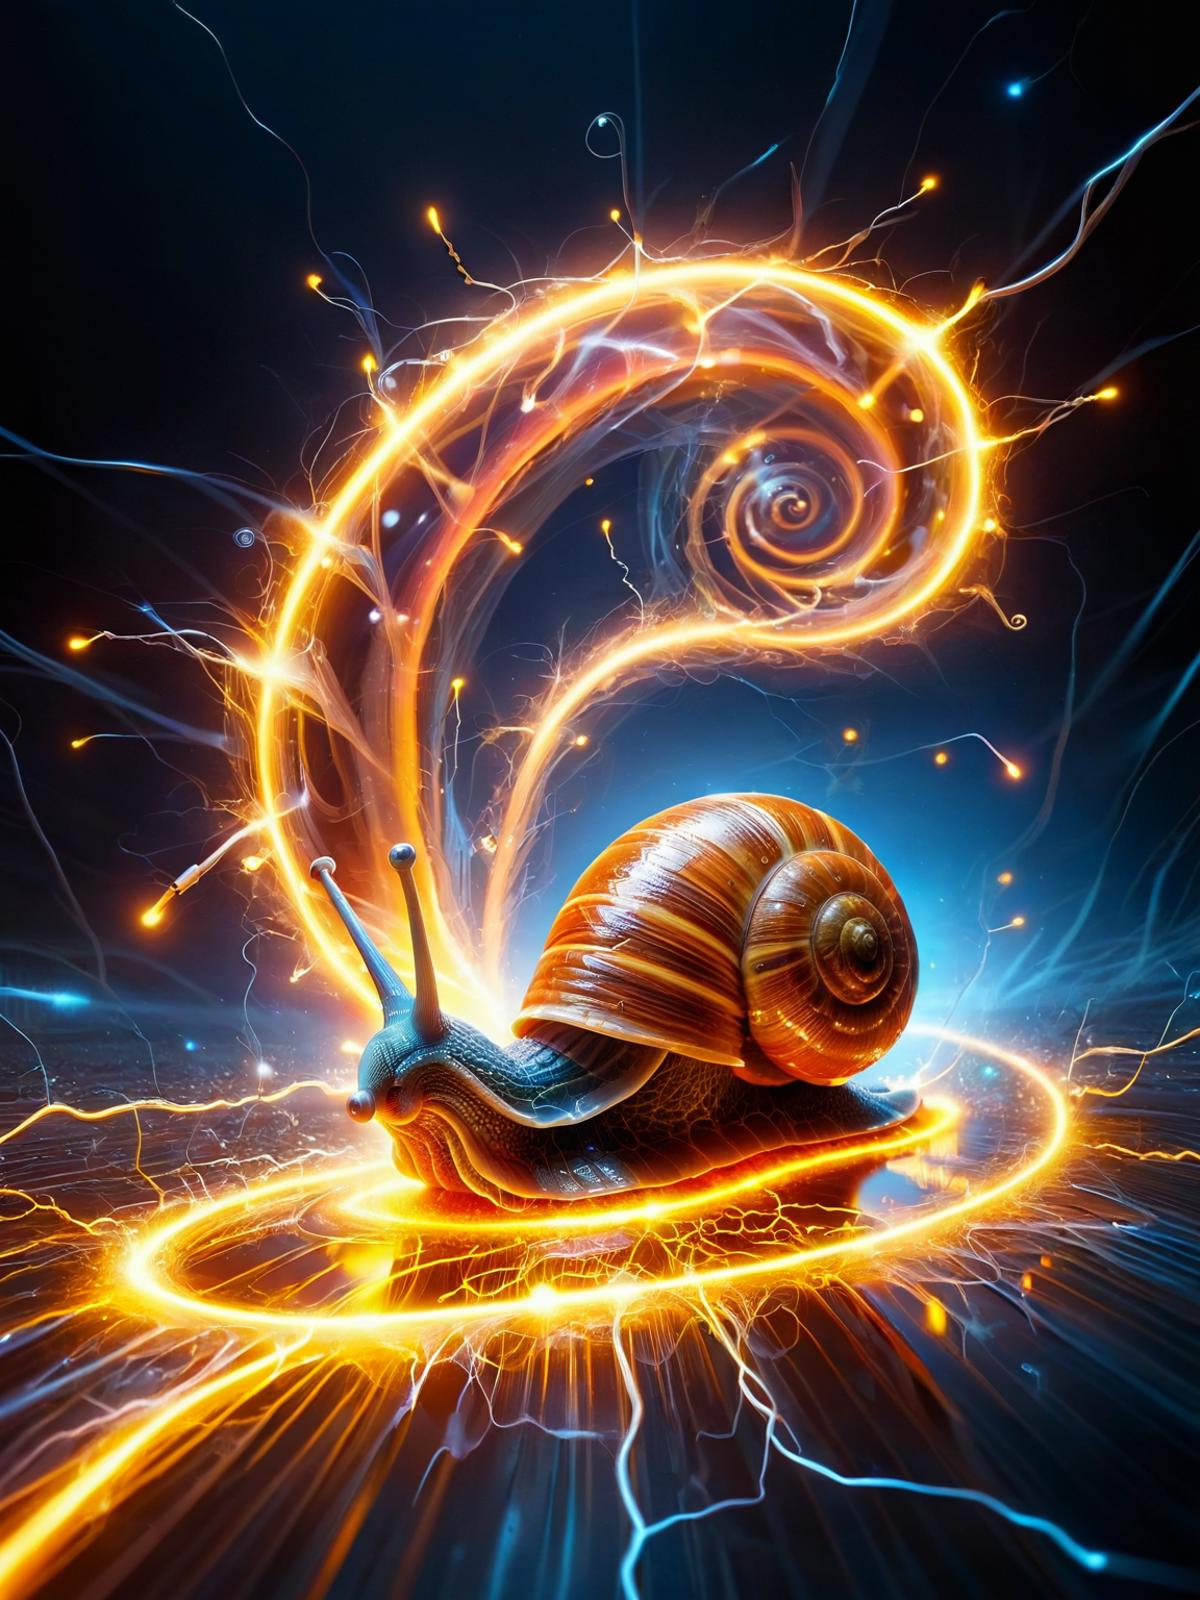 A colorful and artistic image of a snail on a spiral, surrounded by neon lights and swirls.